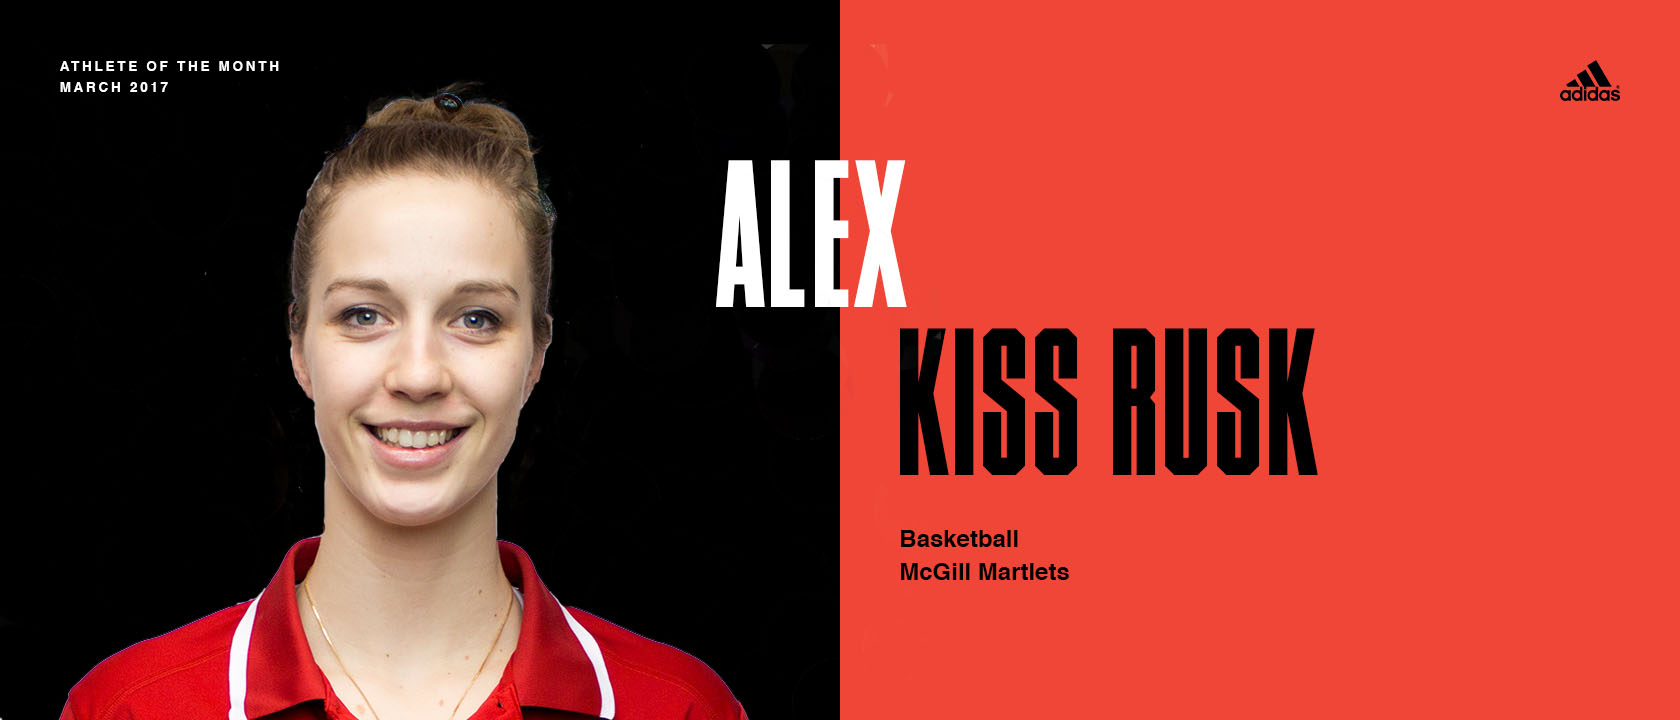 2017 U SPORTS Champions Series: March Athlete of the Month Kiss-Rusk’s domination leads McGill to historic first title